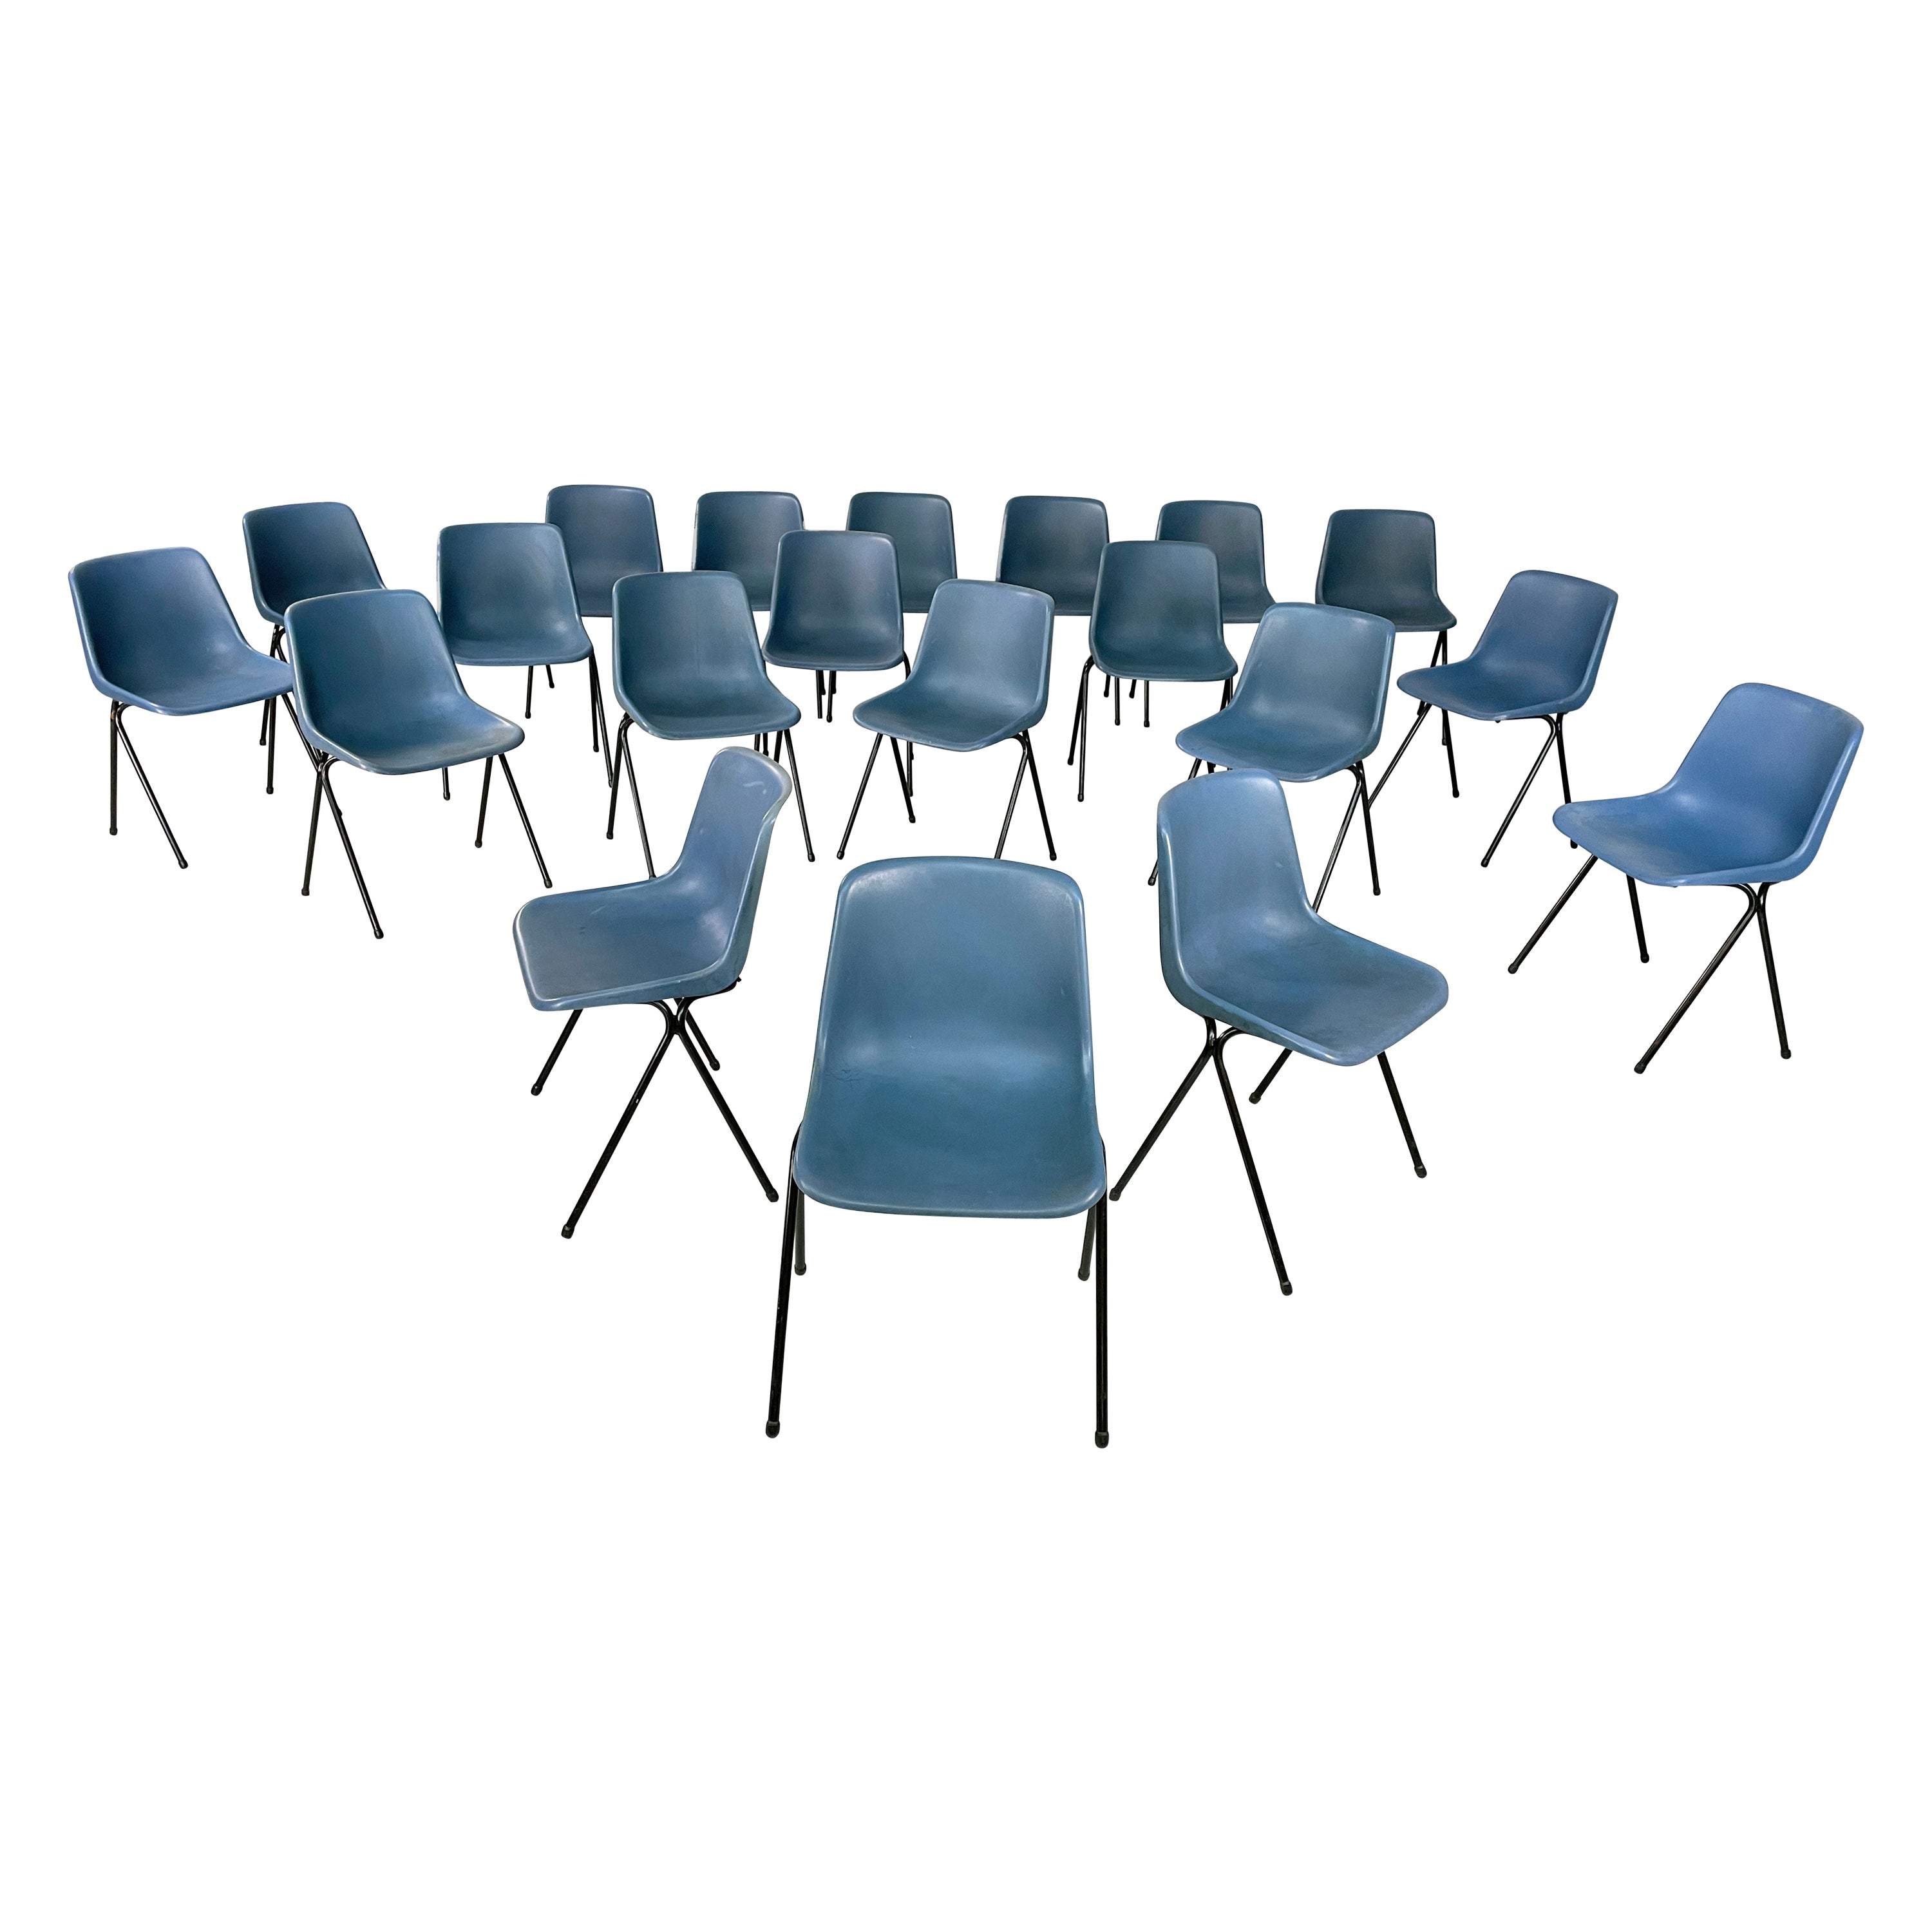 Italian modern Stackable chairs in blue plastic and black metal, 2000s For Sale